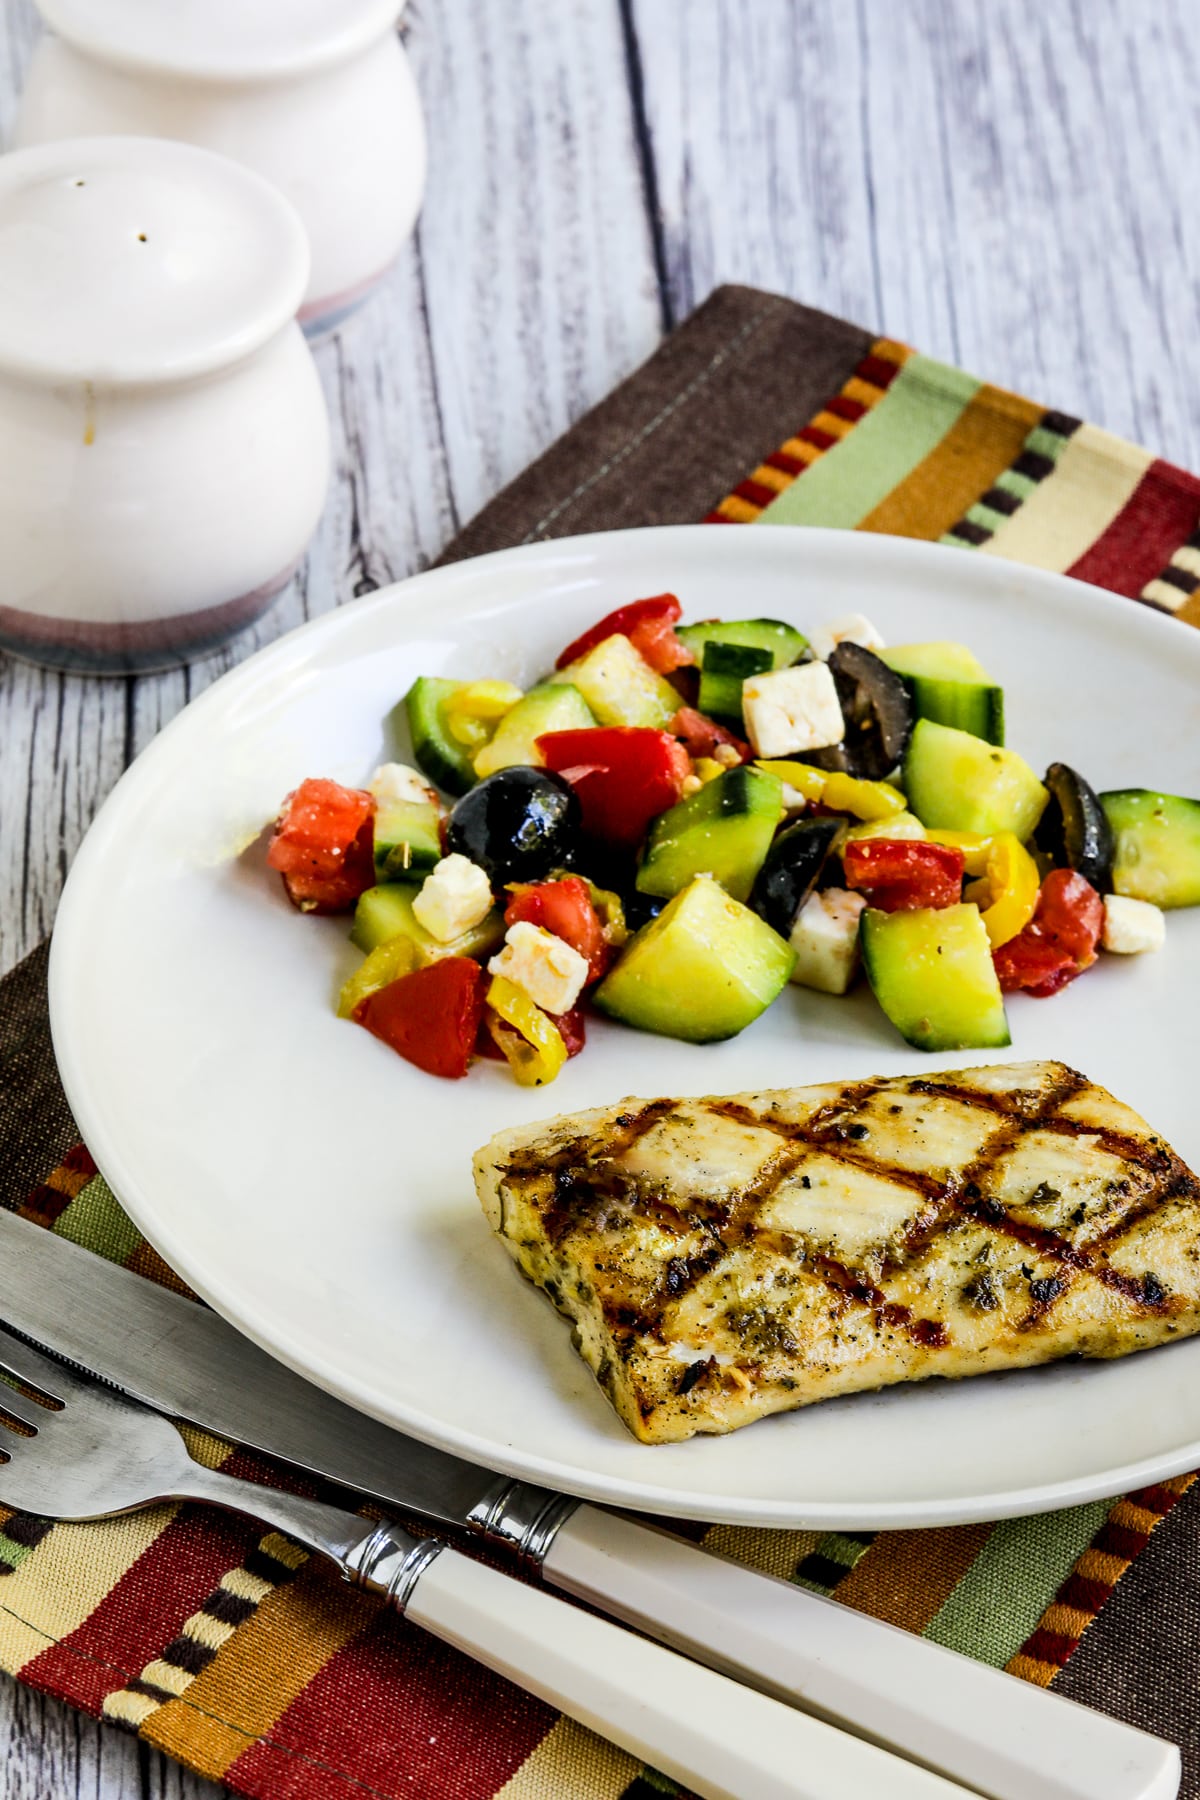 Grilled fish, lemon and capers are shown on a plate with salad.